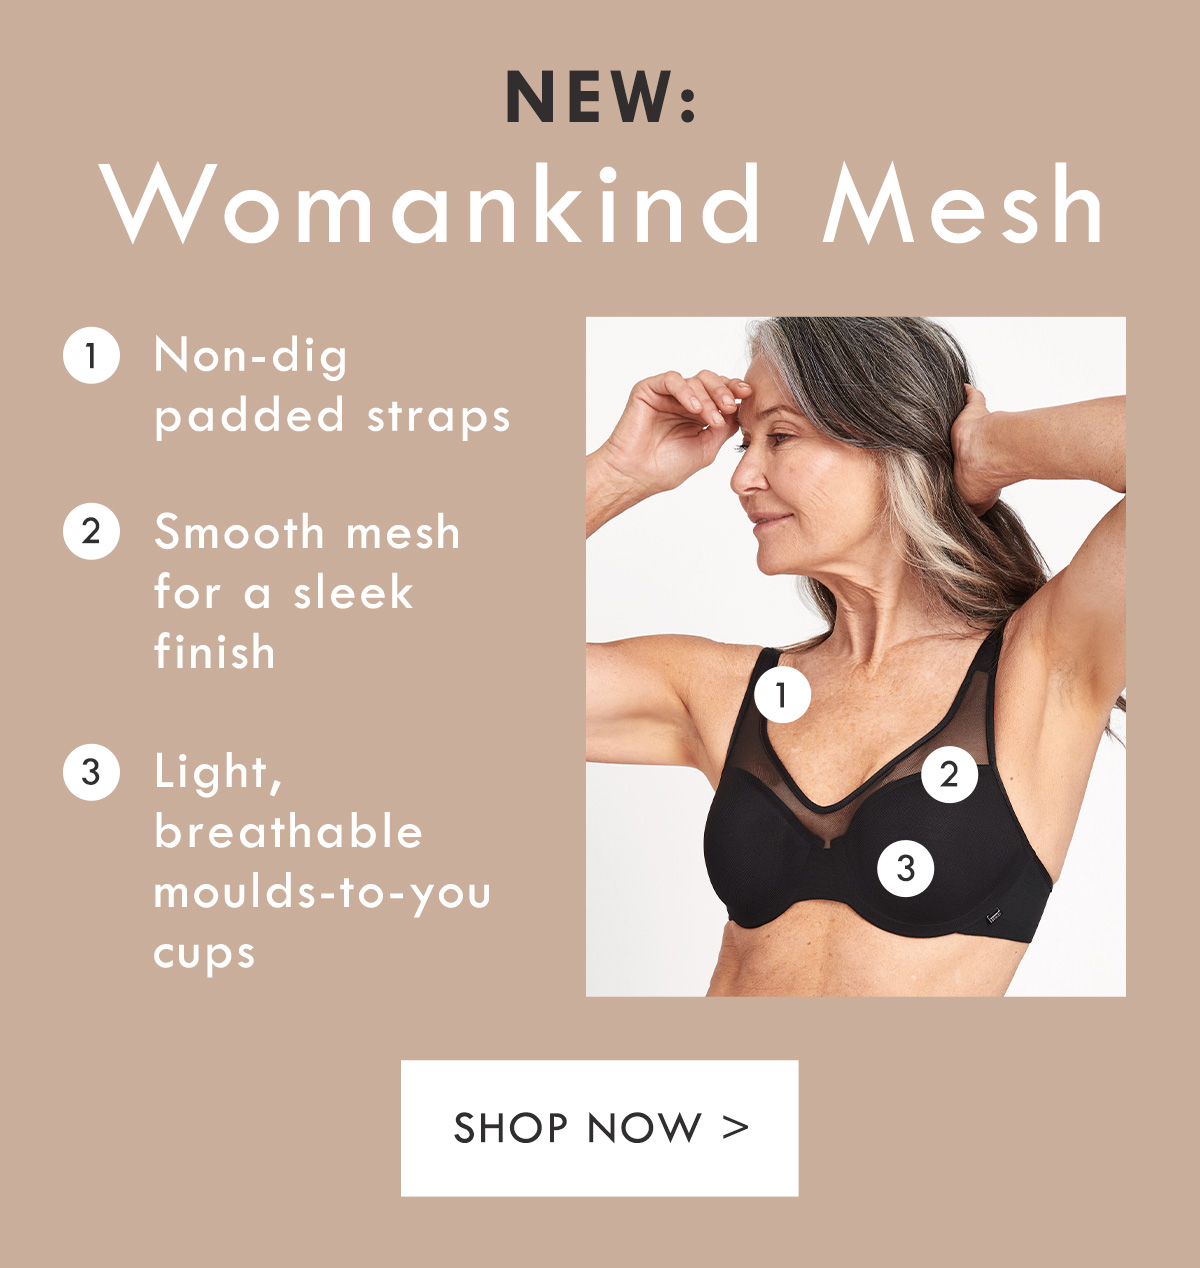 New: Womankind Mesh. Non-dig padded straps. Smooth mesh for a sleek finish. Light, breathable moulds-to-you cups. Shop Now.